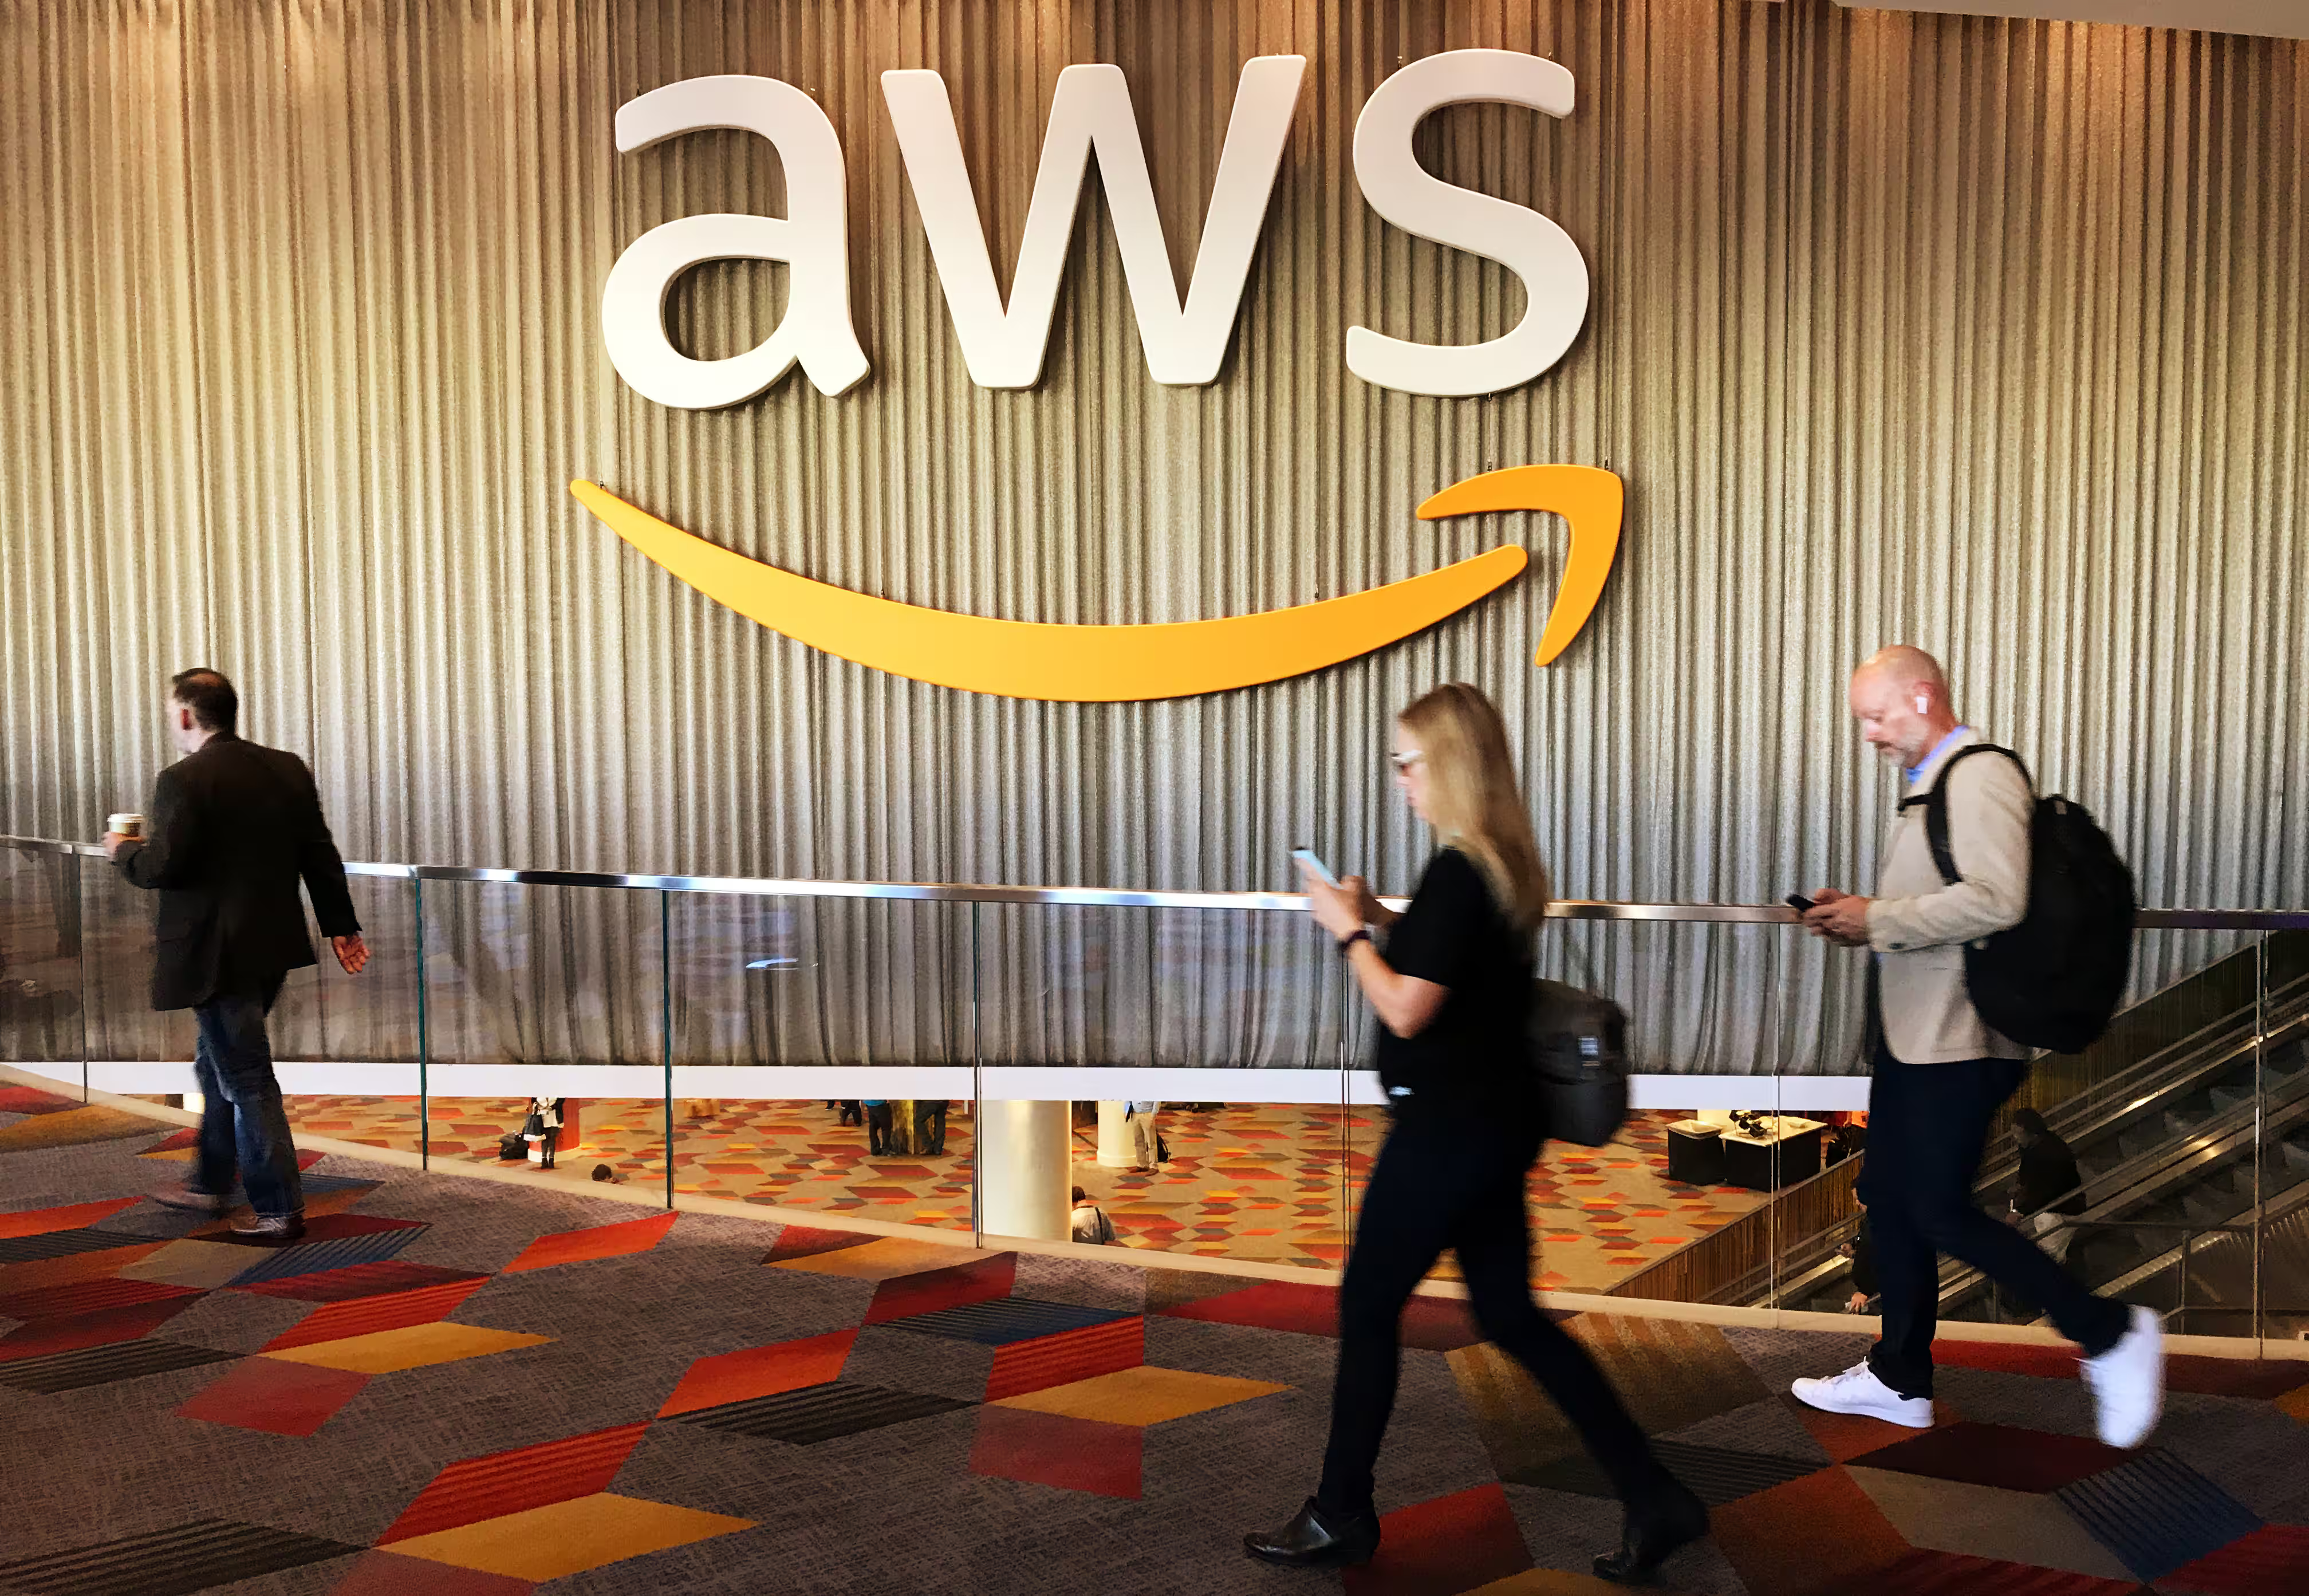 Amazon in talks with Italy for major AWS data centre expansion